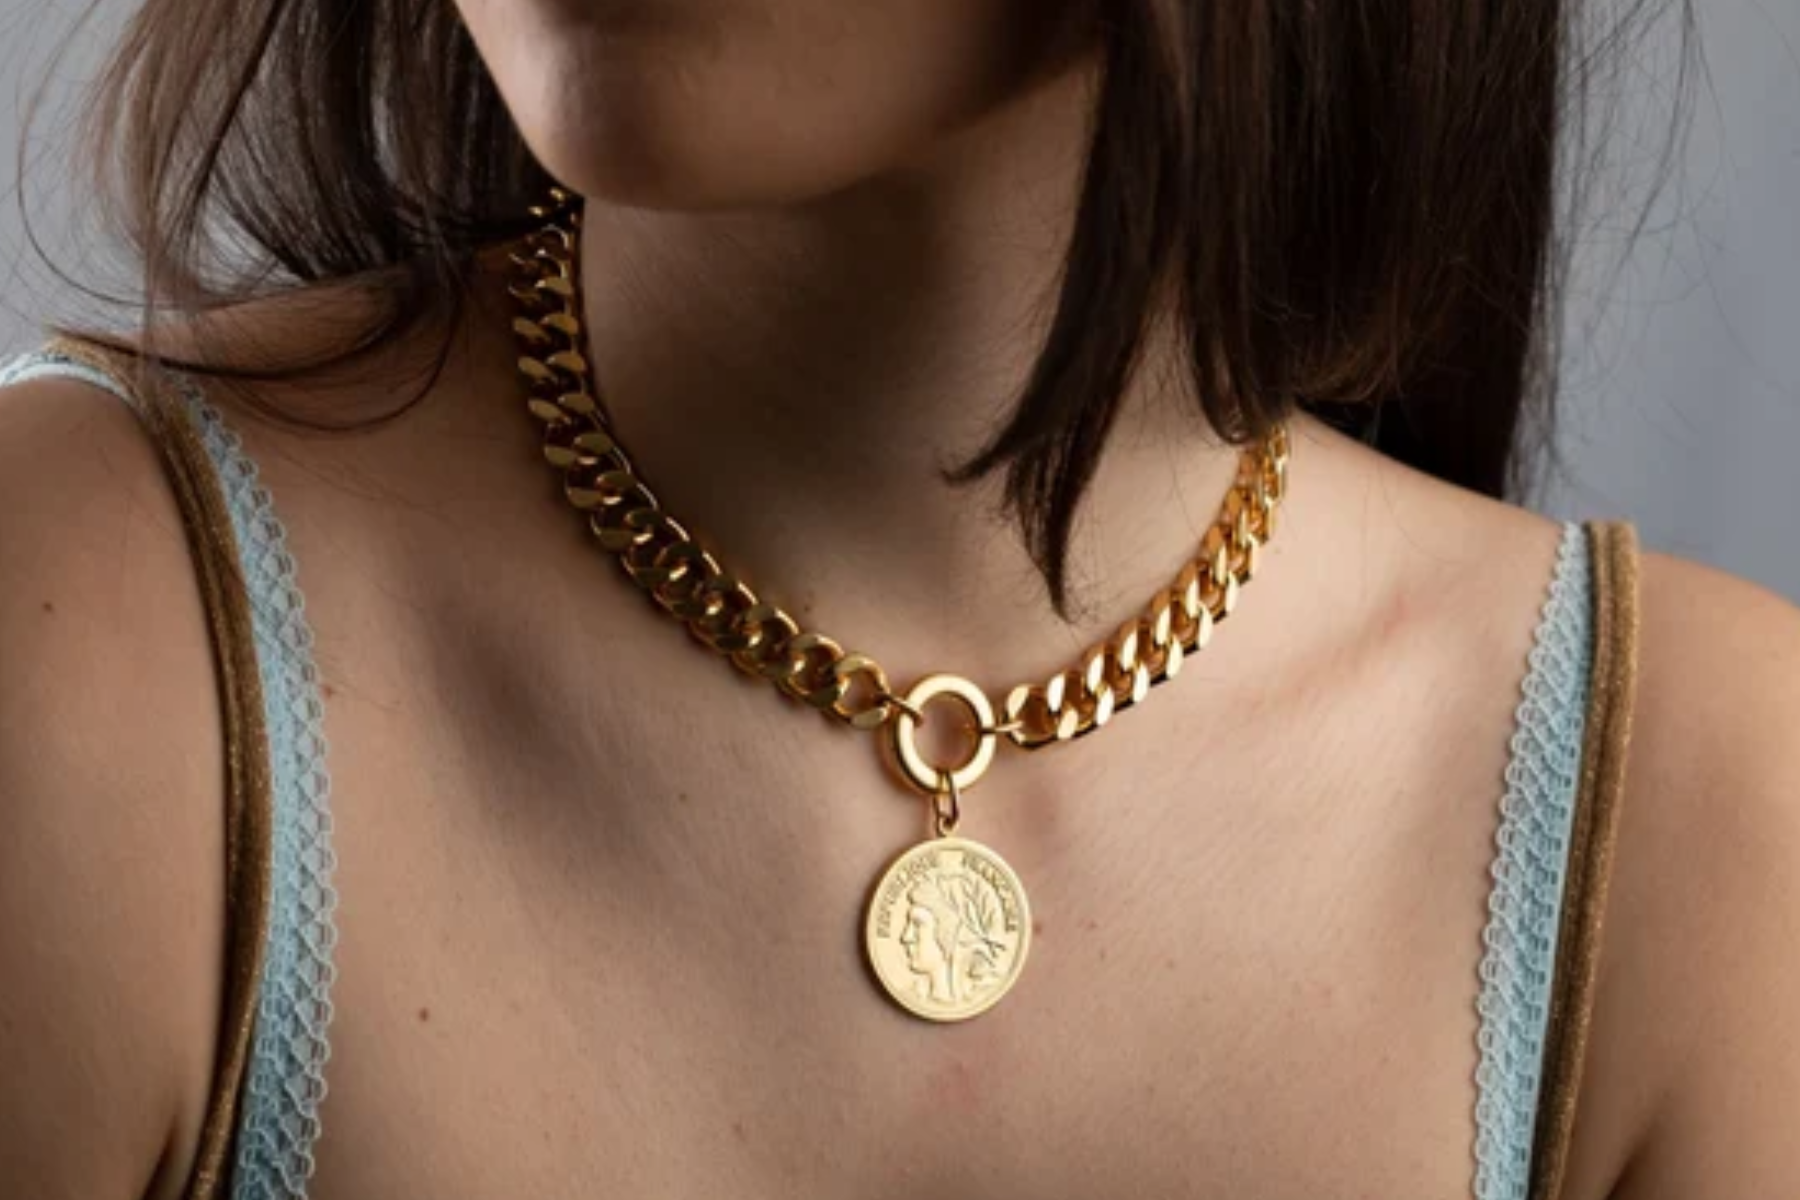 A woman adorned with a gold coin chain necklace